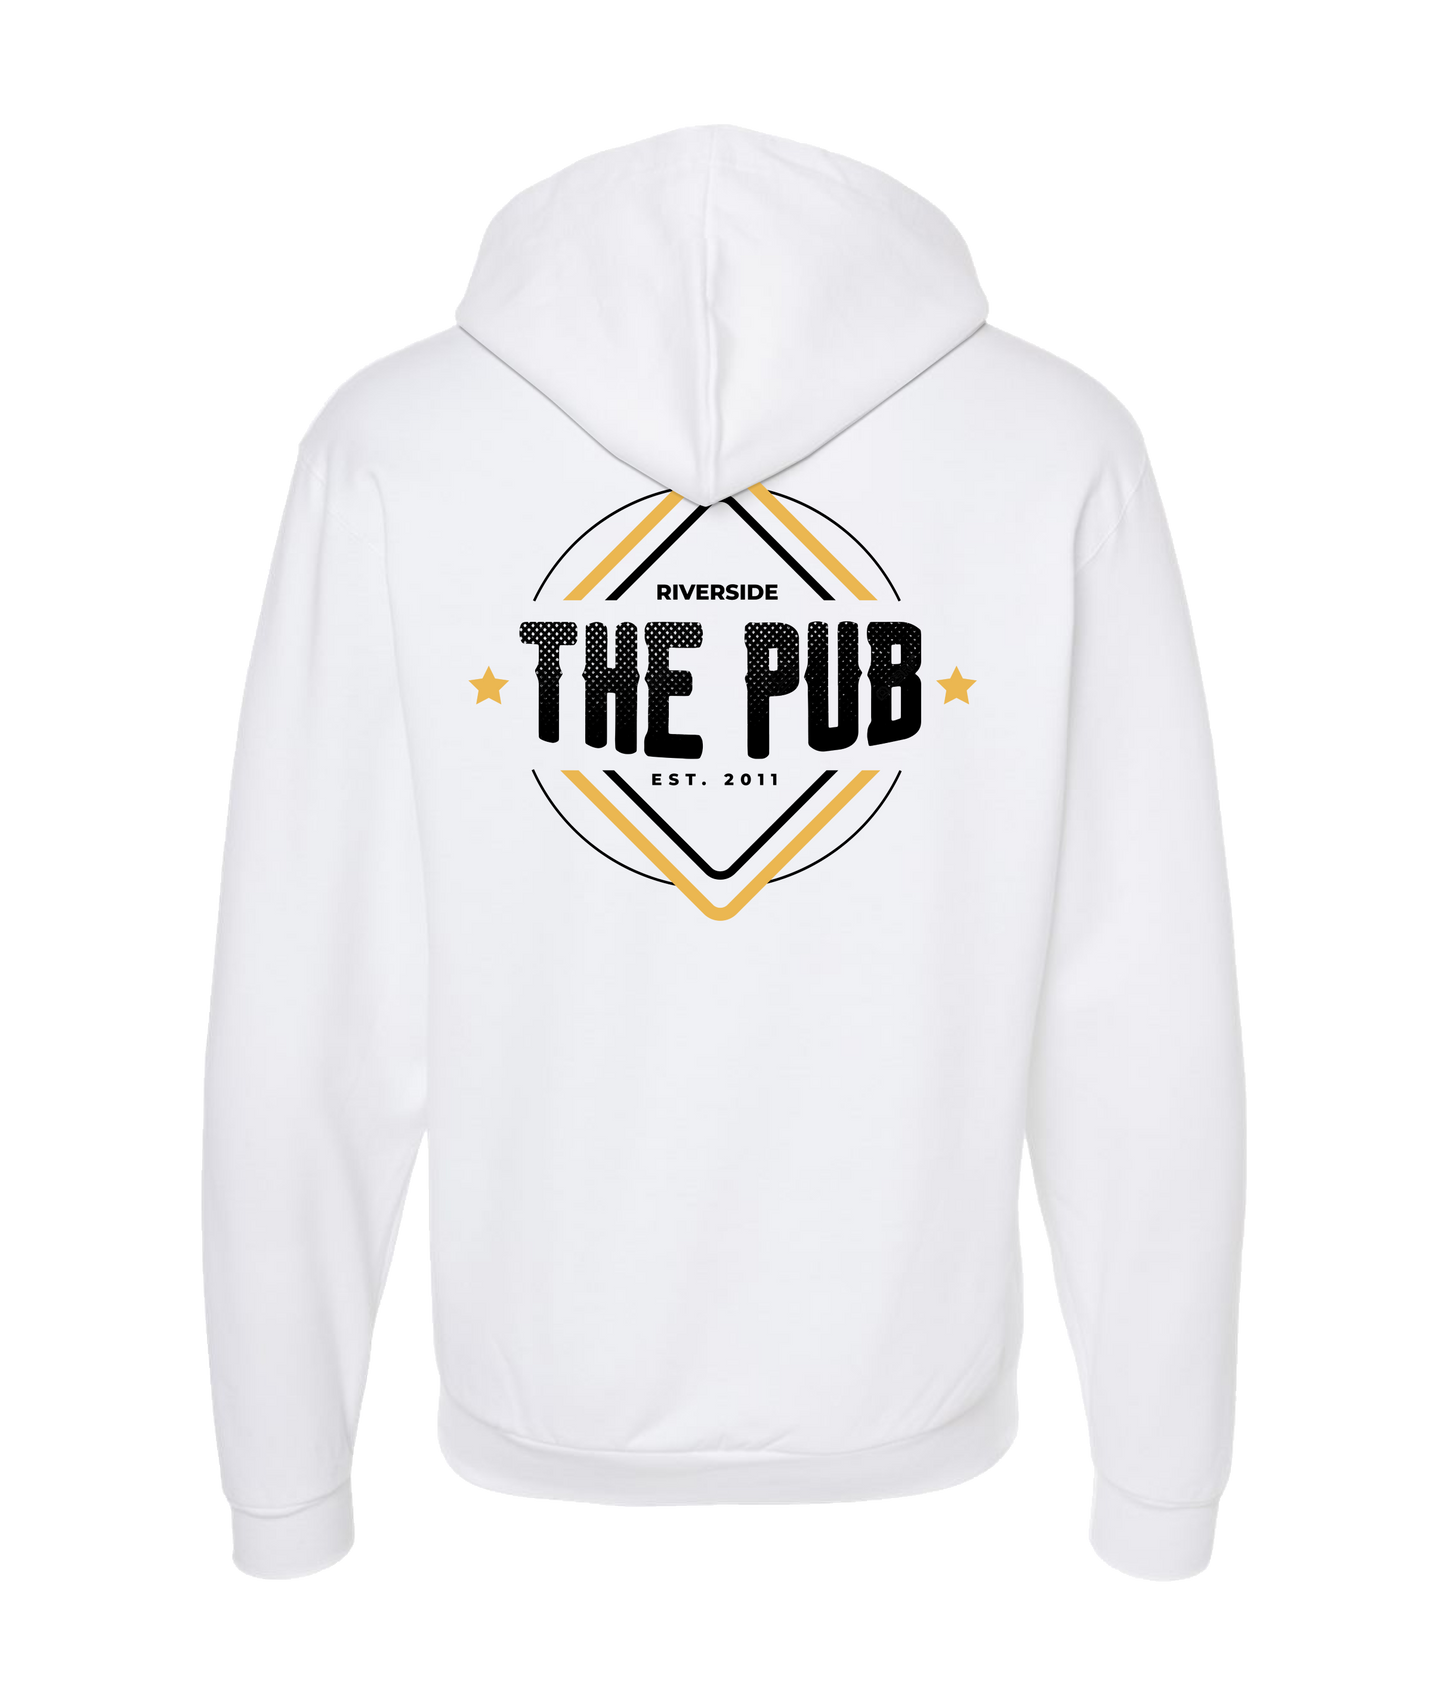 Riverside Pub and Grill - The Pub - White Zip Up Hoodie